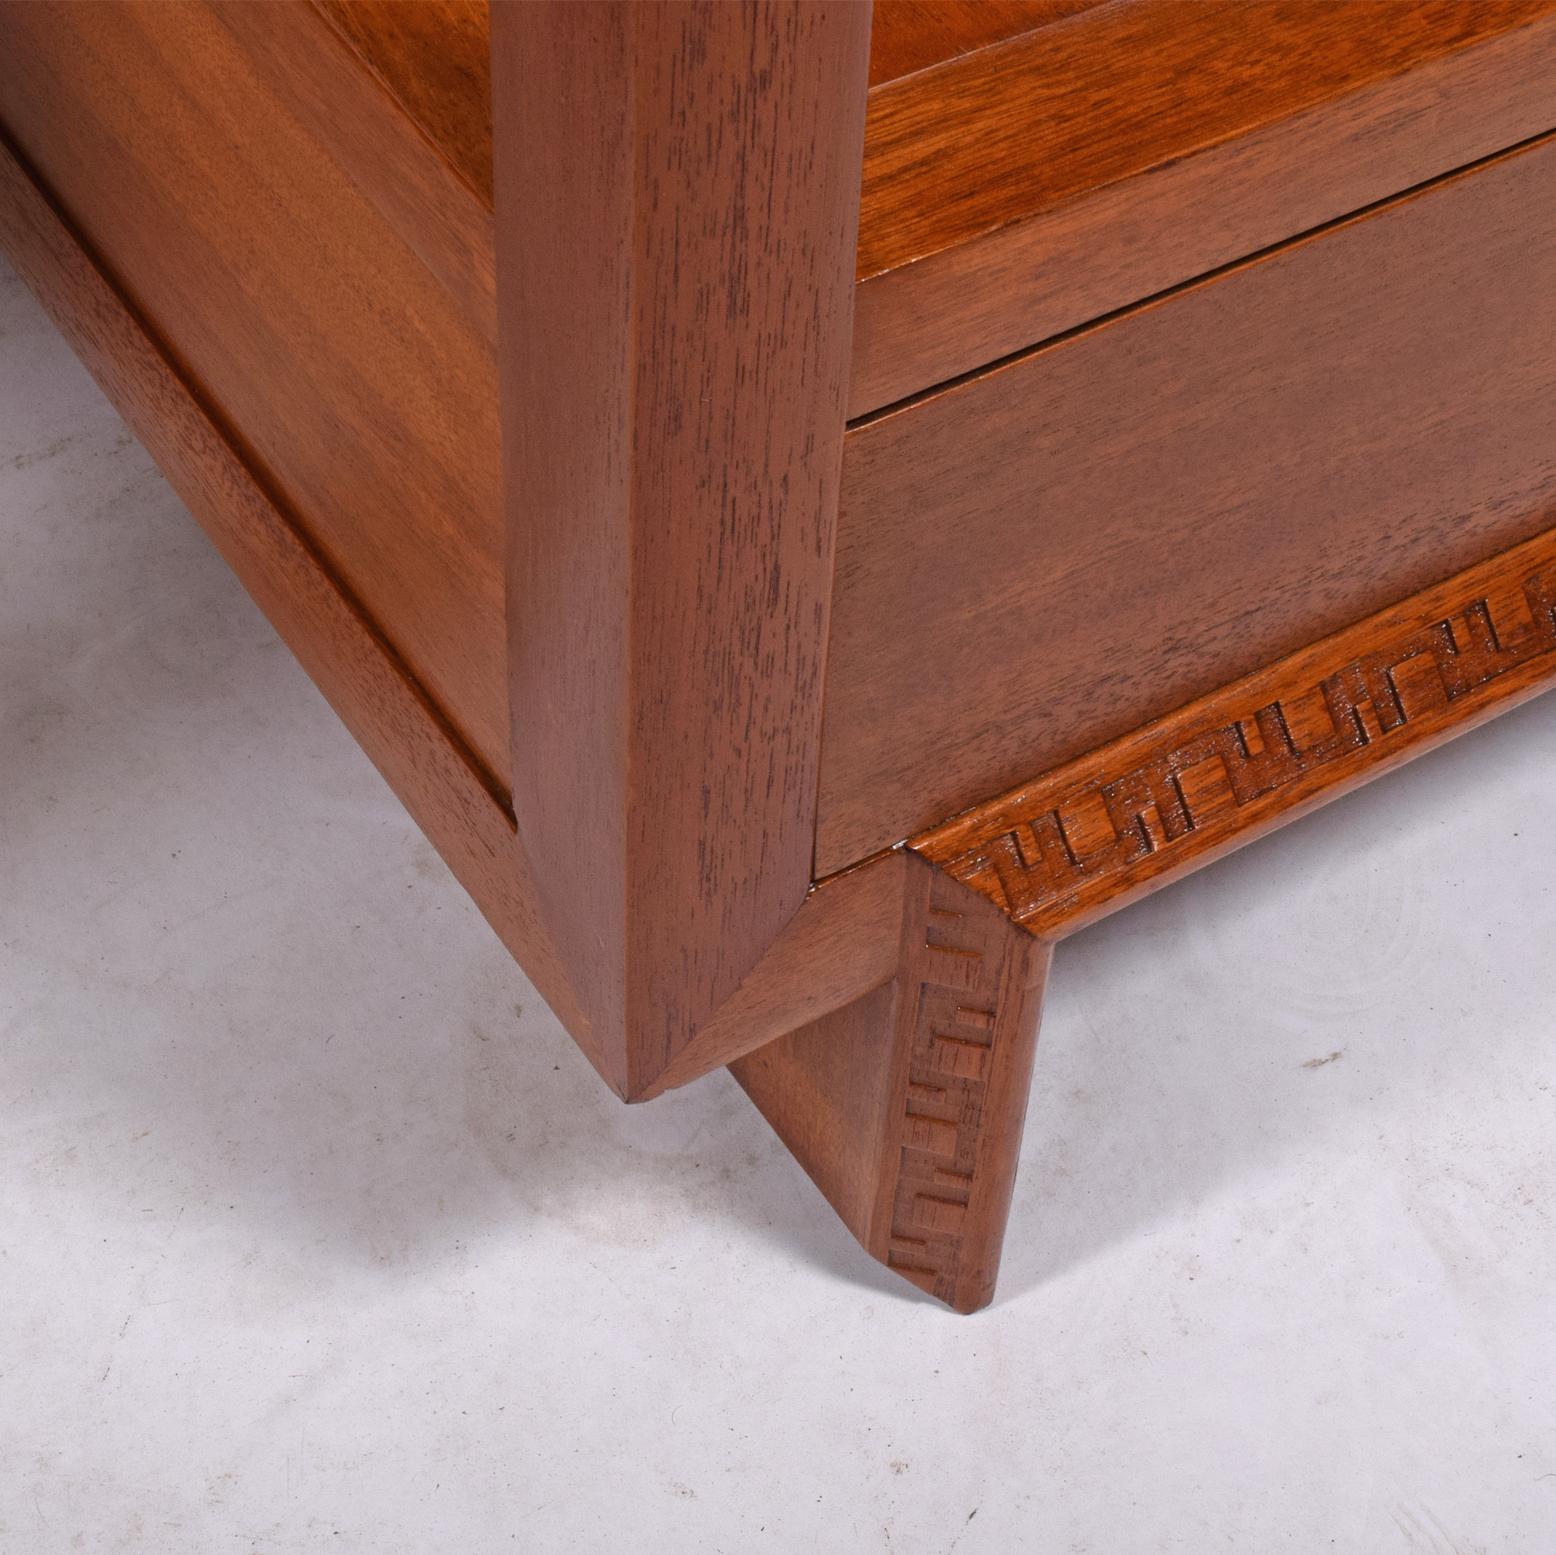 Mid-20th Century Pair of Nightstands/Side Tables by Frank Lloyd Wright for Heritage Henredon